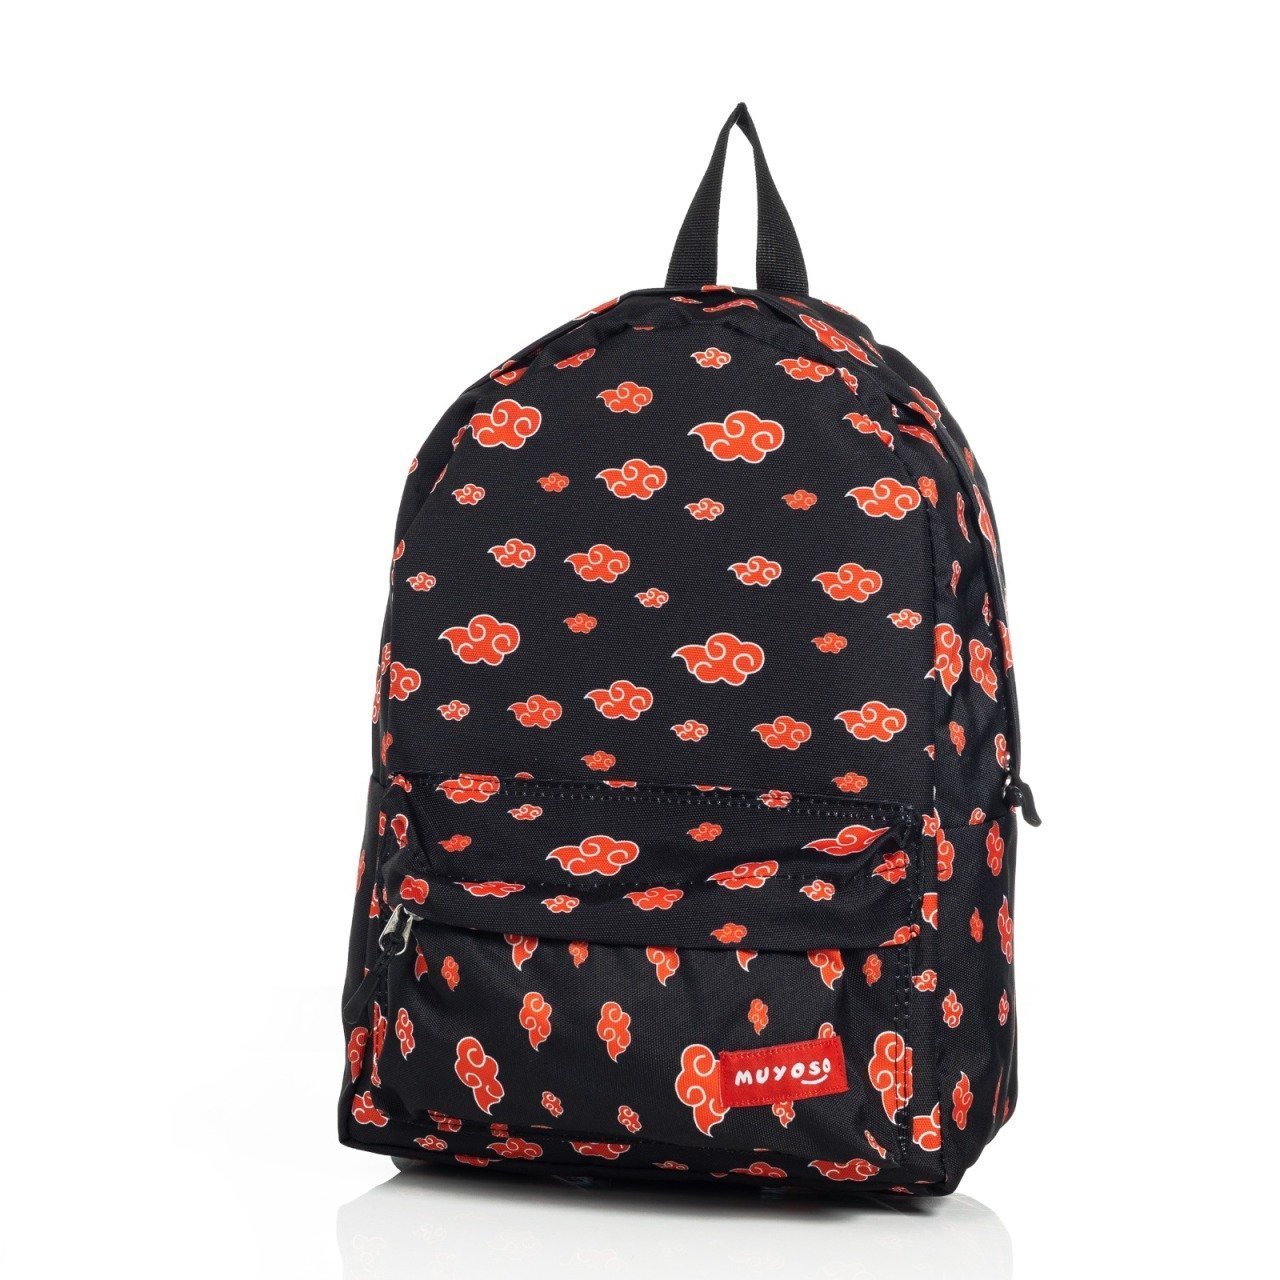 Red cloud backpack